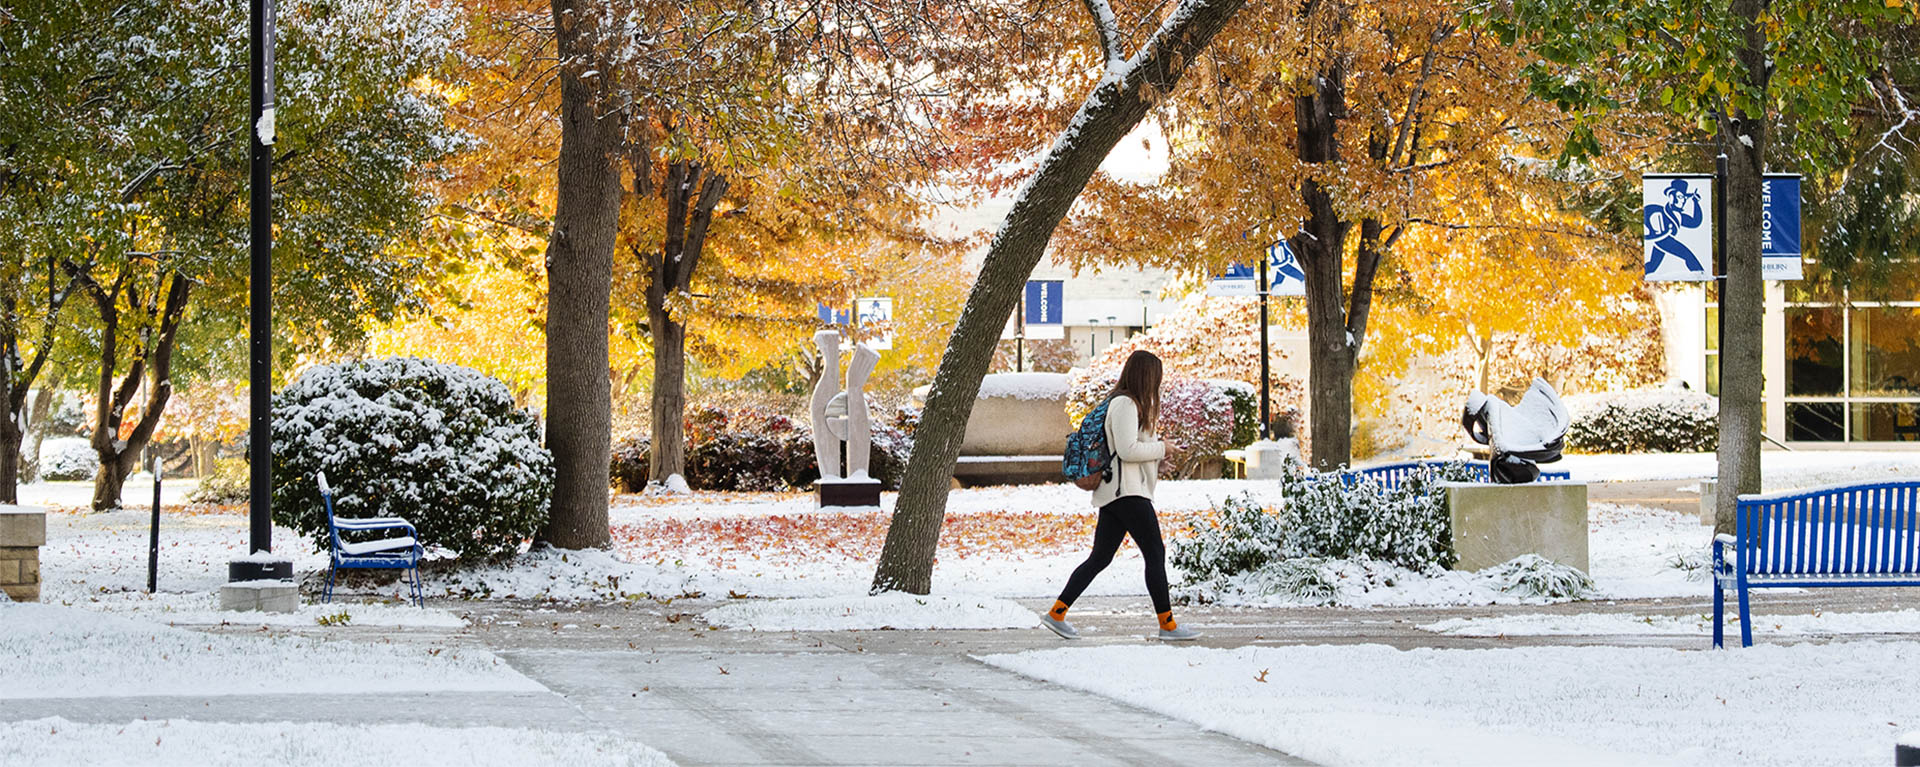 Student walking on campus with fall trees and snow